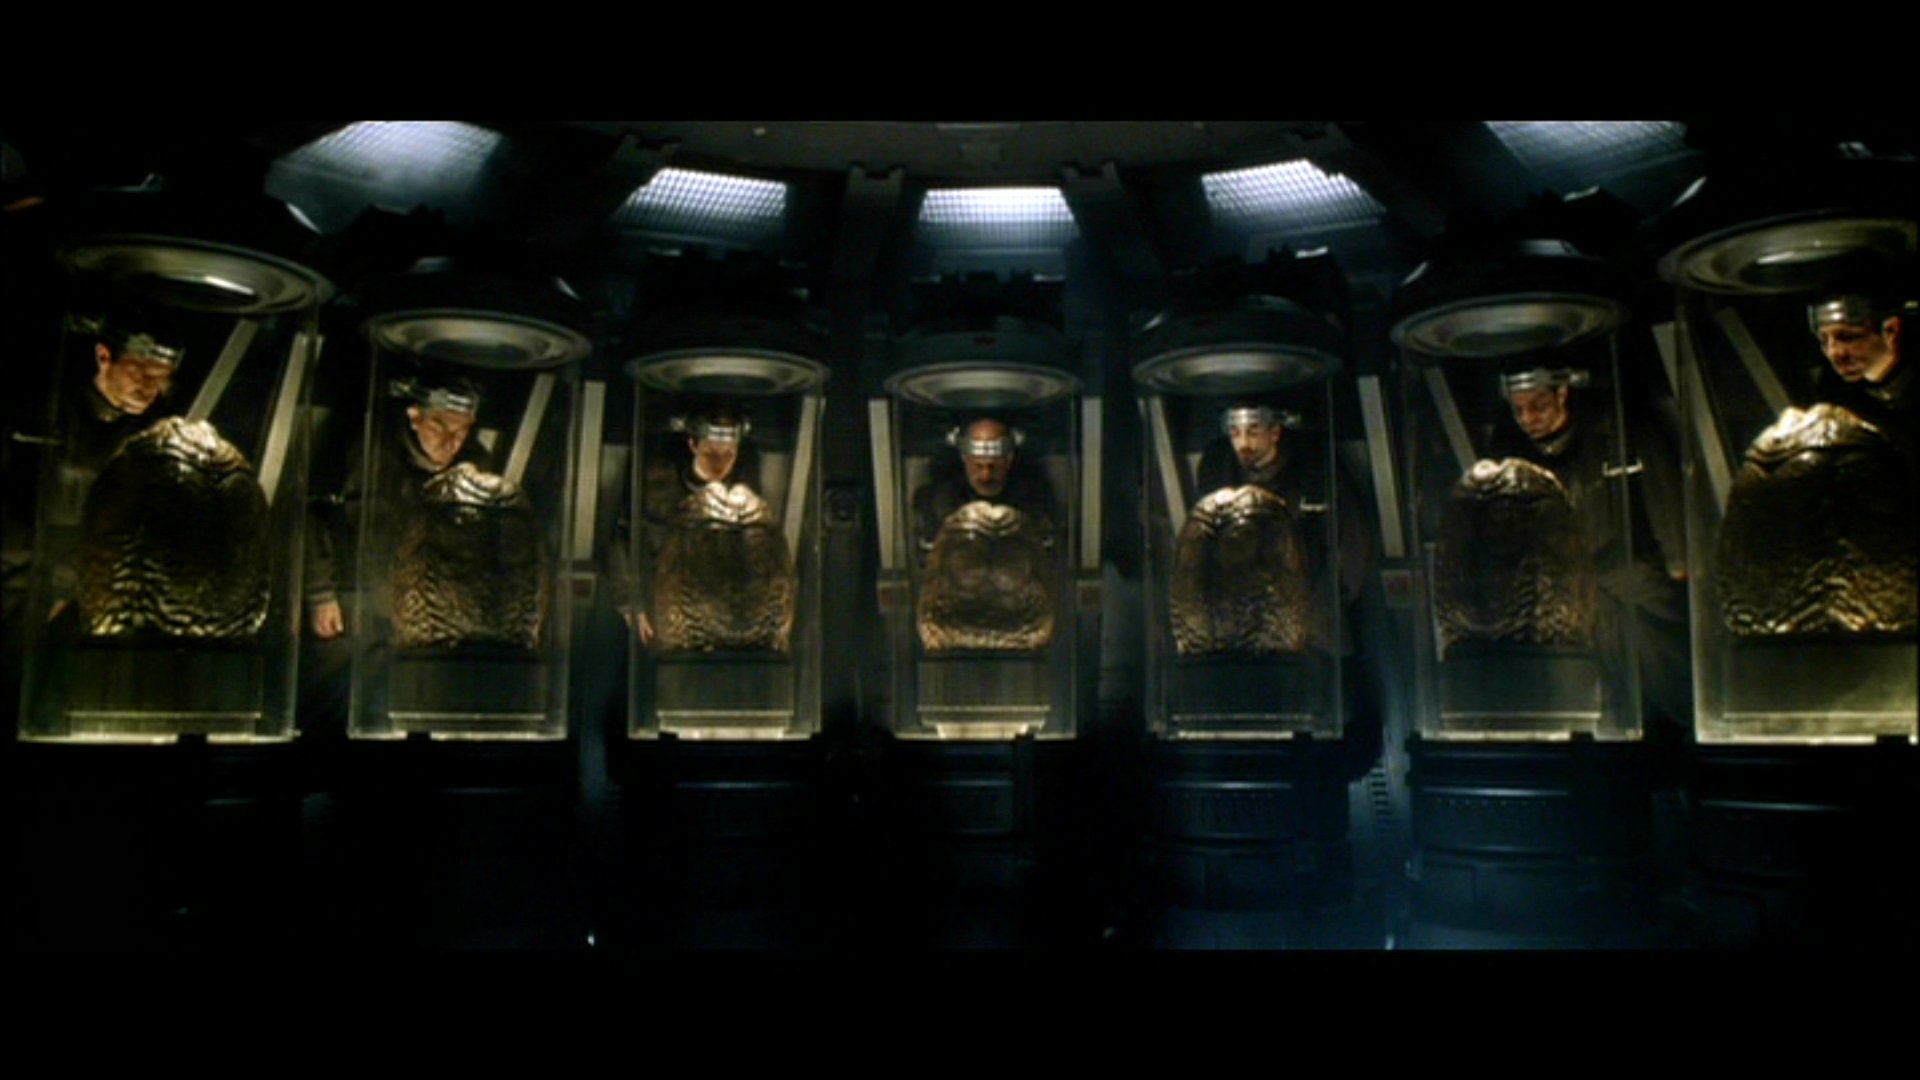 Alien: Resurrection Full HD Wallpaper and Background Image | 1920x1080 | ID:2392471920 x 1080